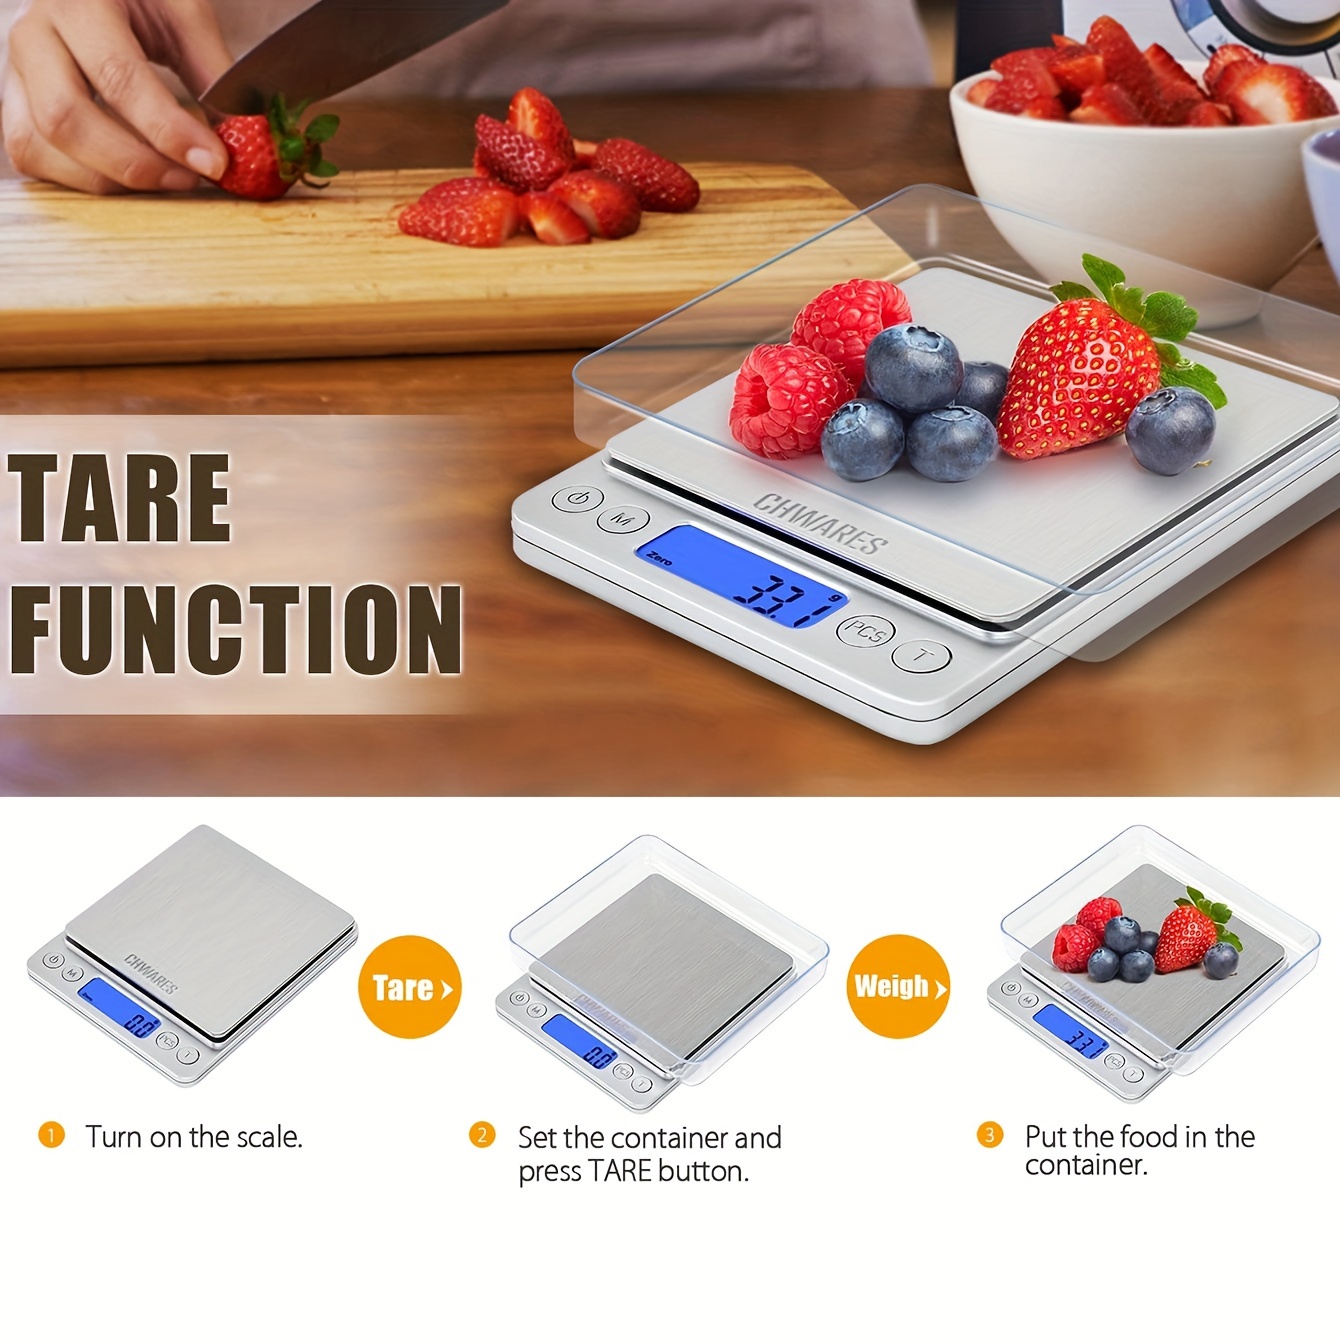 Digital Food Gram Scale for Food Ounces and Grams,Baking